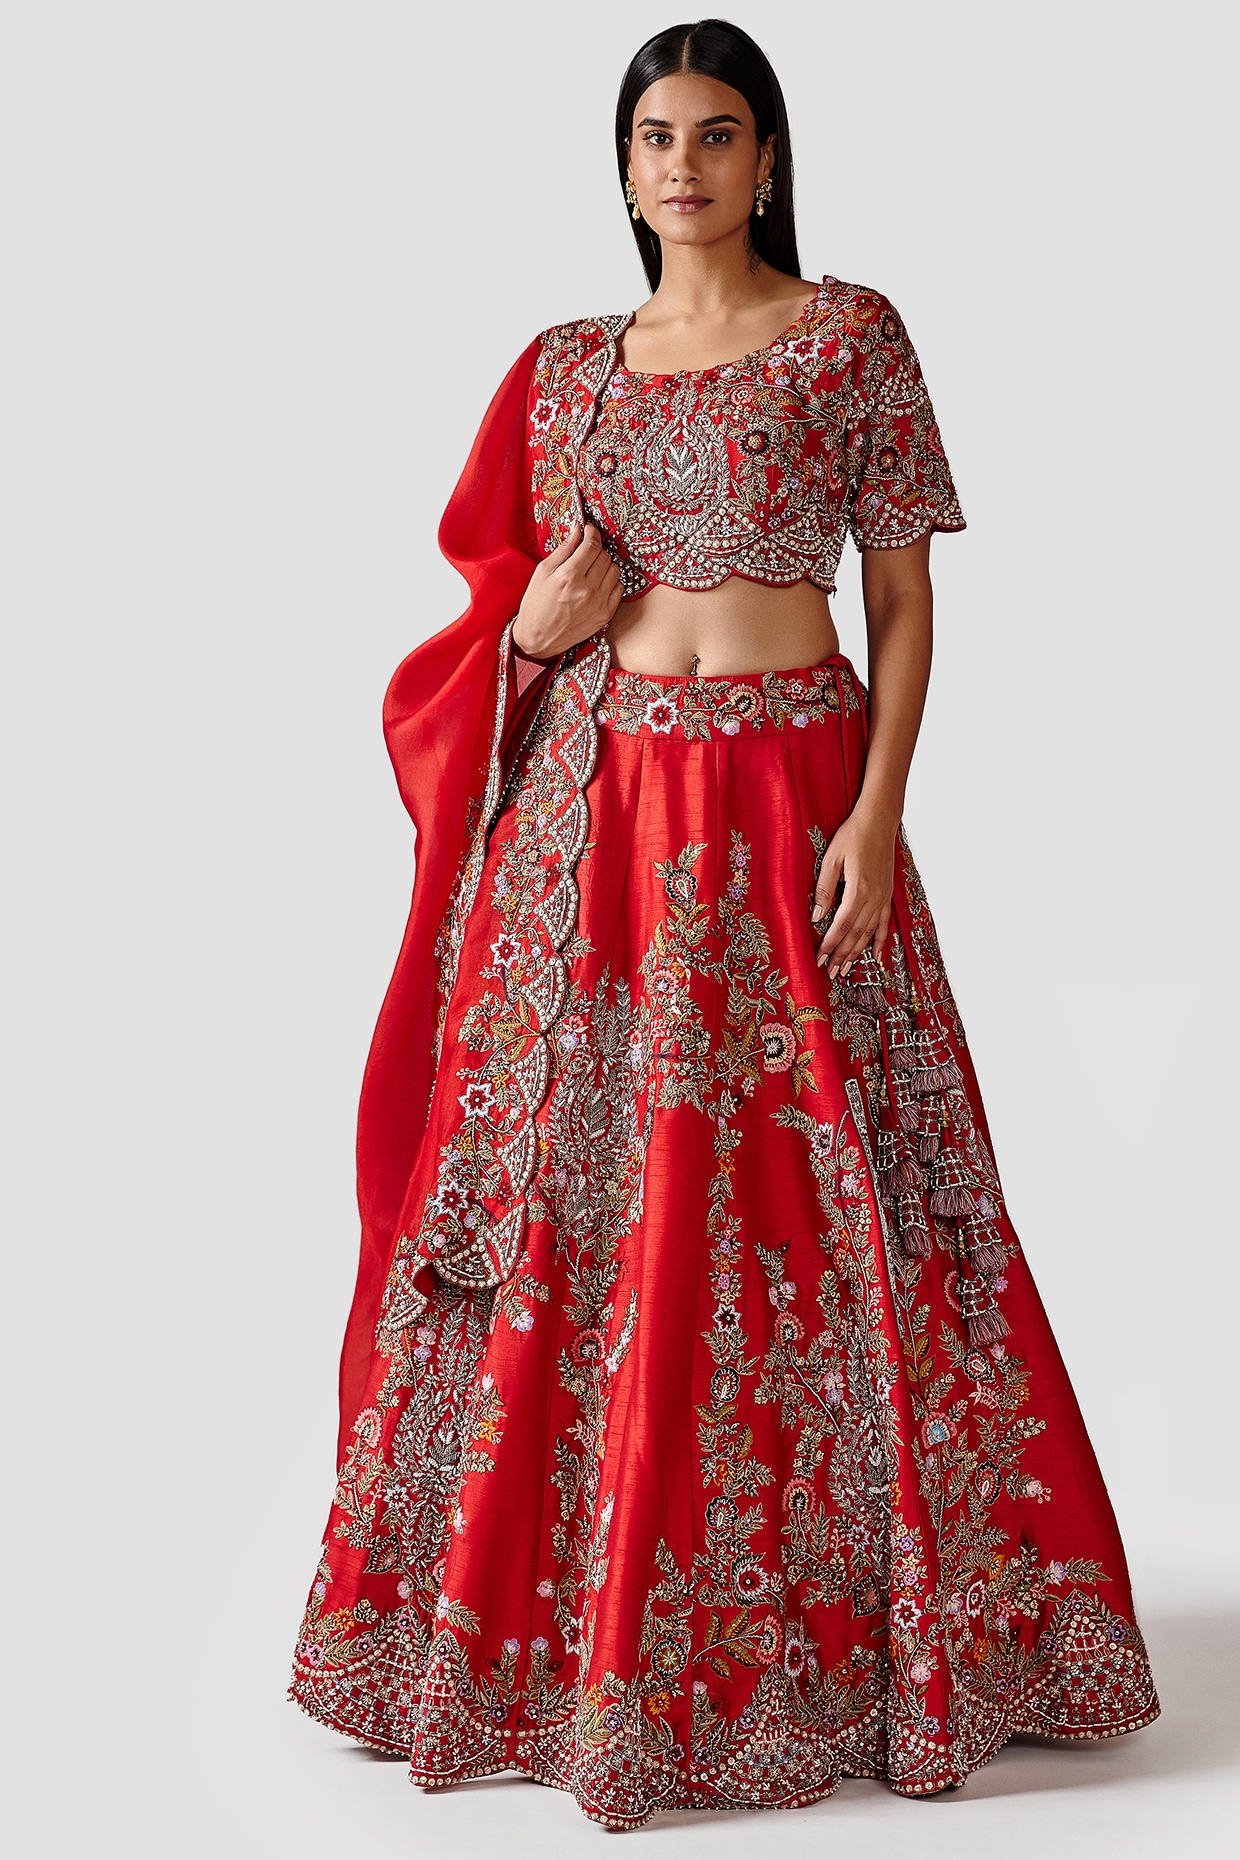 If I Were Getting Married today- My Favourite Lehenga Looks | The Moi Blog  #shorts - YouTube